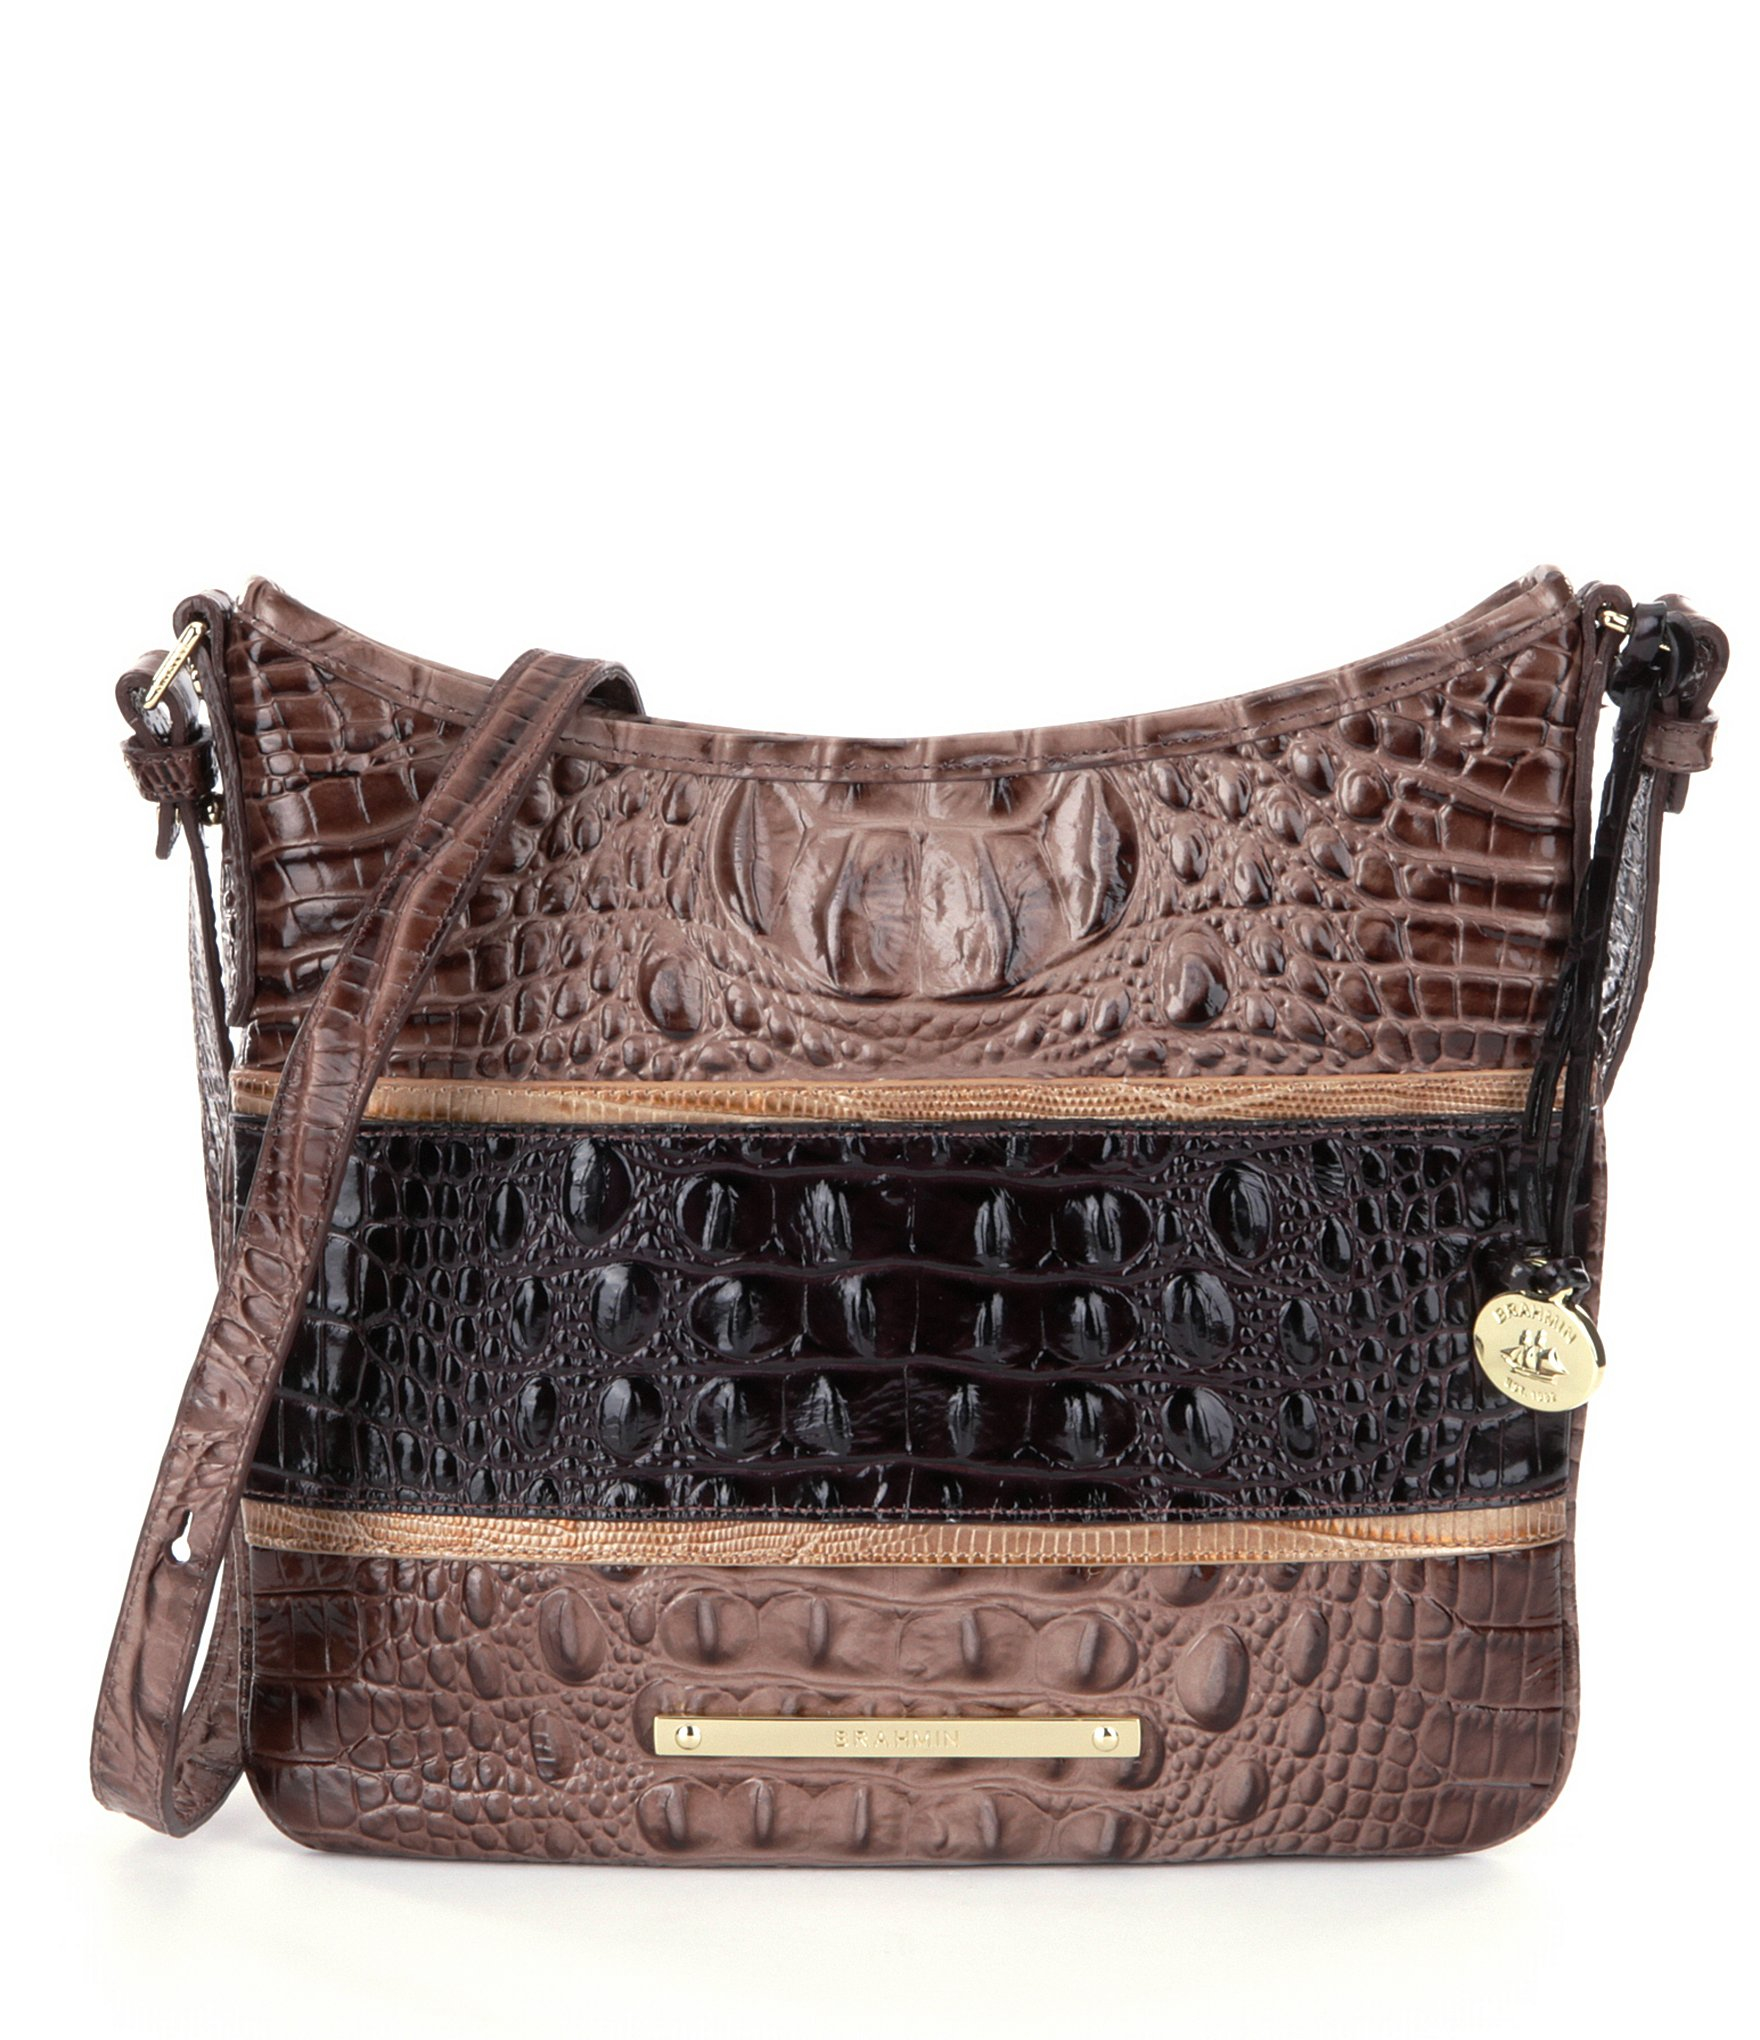 Brahmin Leather Caron Collection Jody Striped Embossed Cross-body Bag in Brown - Lyst